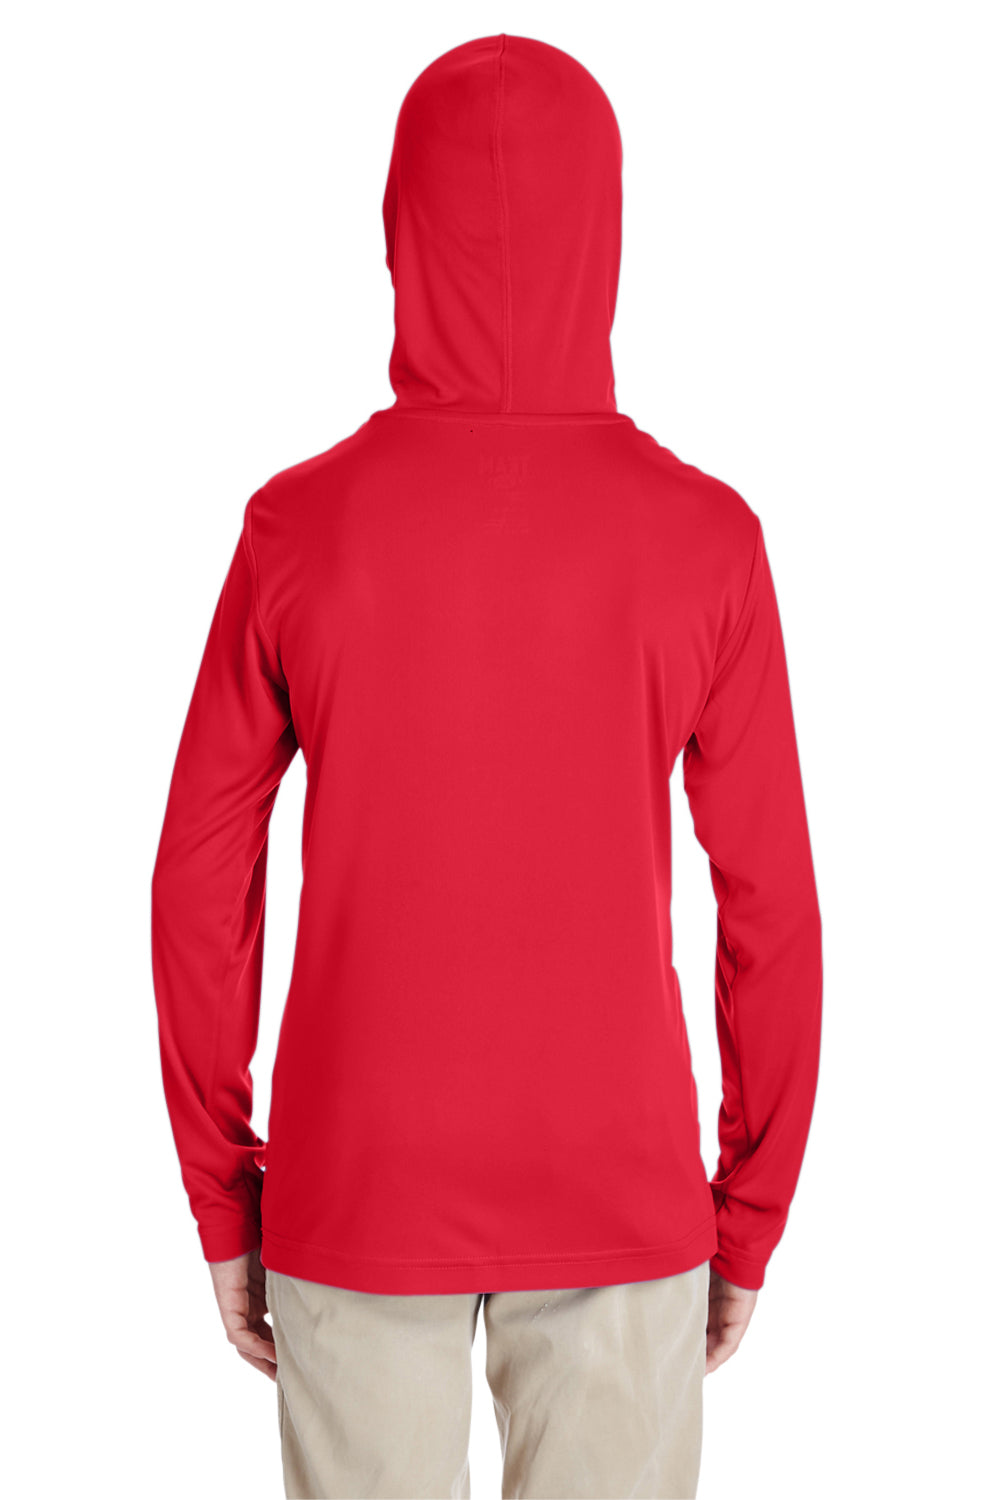 Team 365 TT41Y Youth Zone Performance Moisture Wicking Long Sleeve Hooded T-Shirt Hoodie Red Back